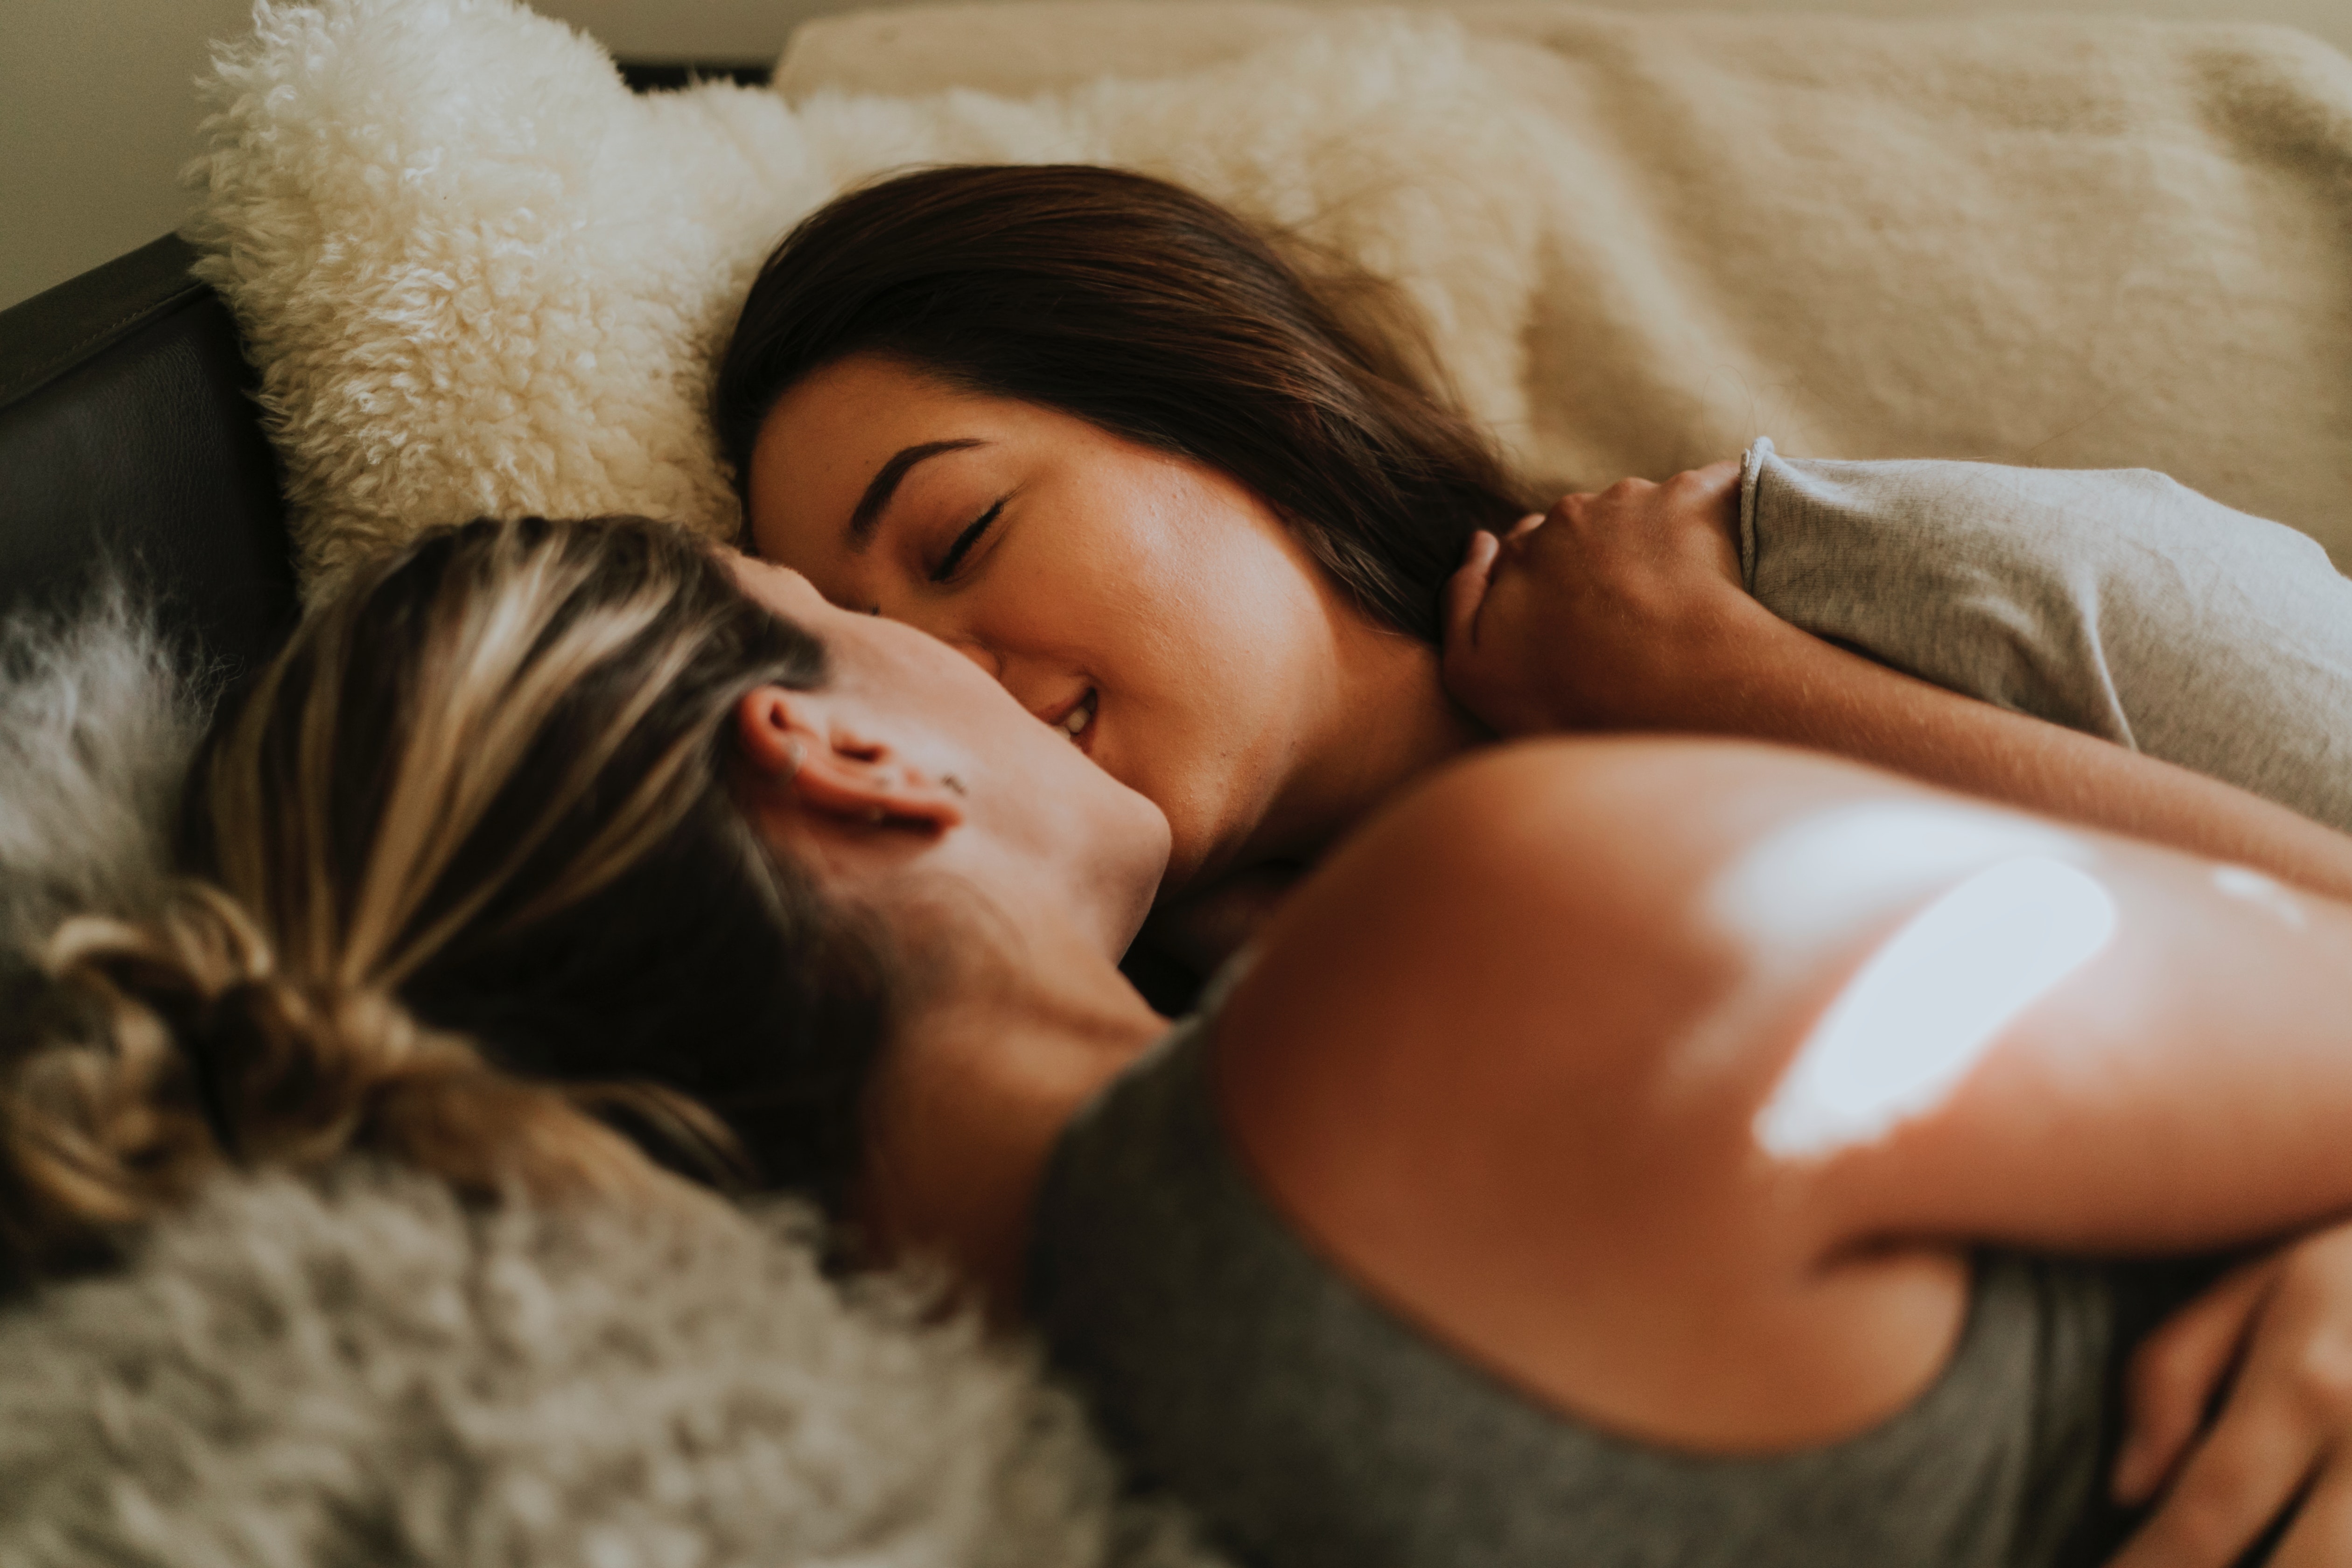 2018 2018 - Lesbian porn is the most popular genre of 2018 | PinkNews